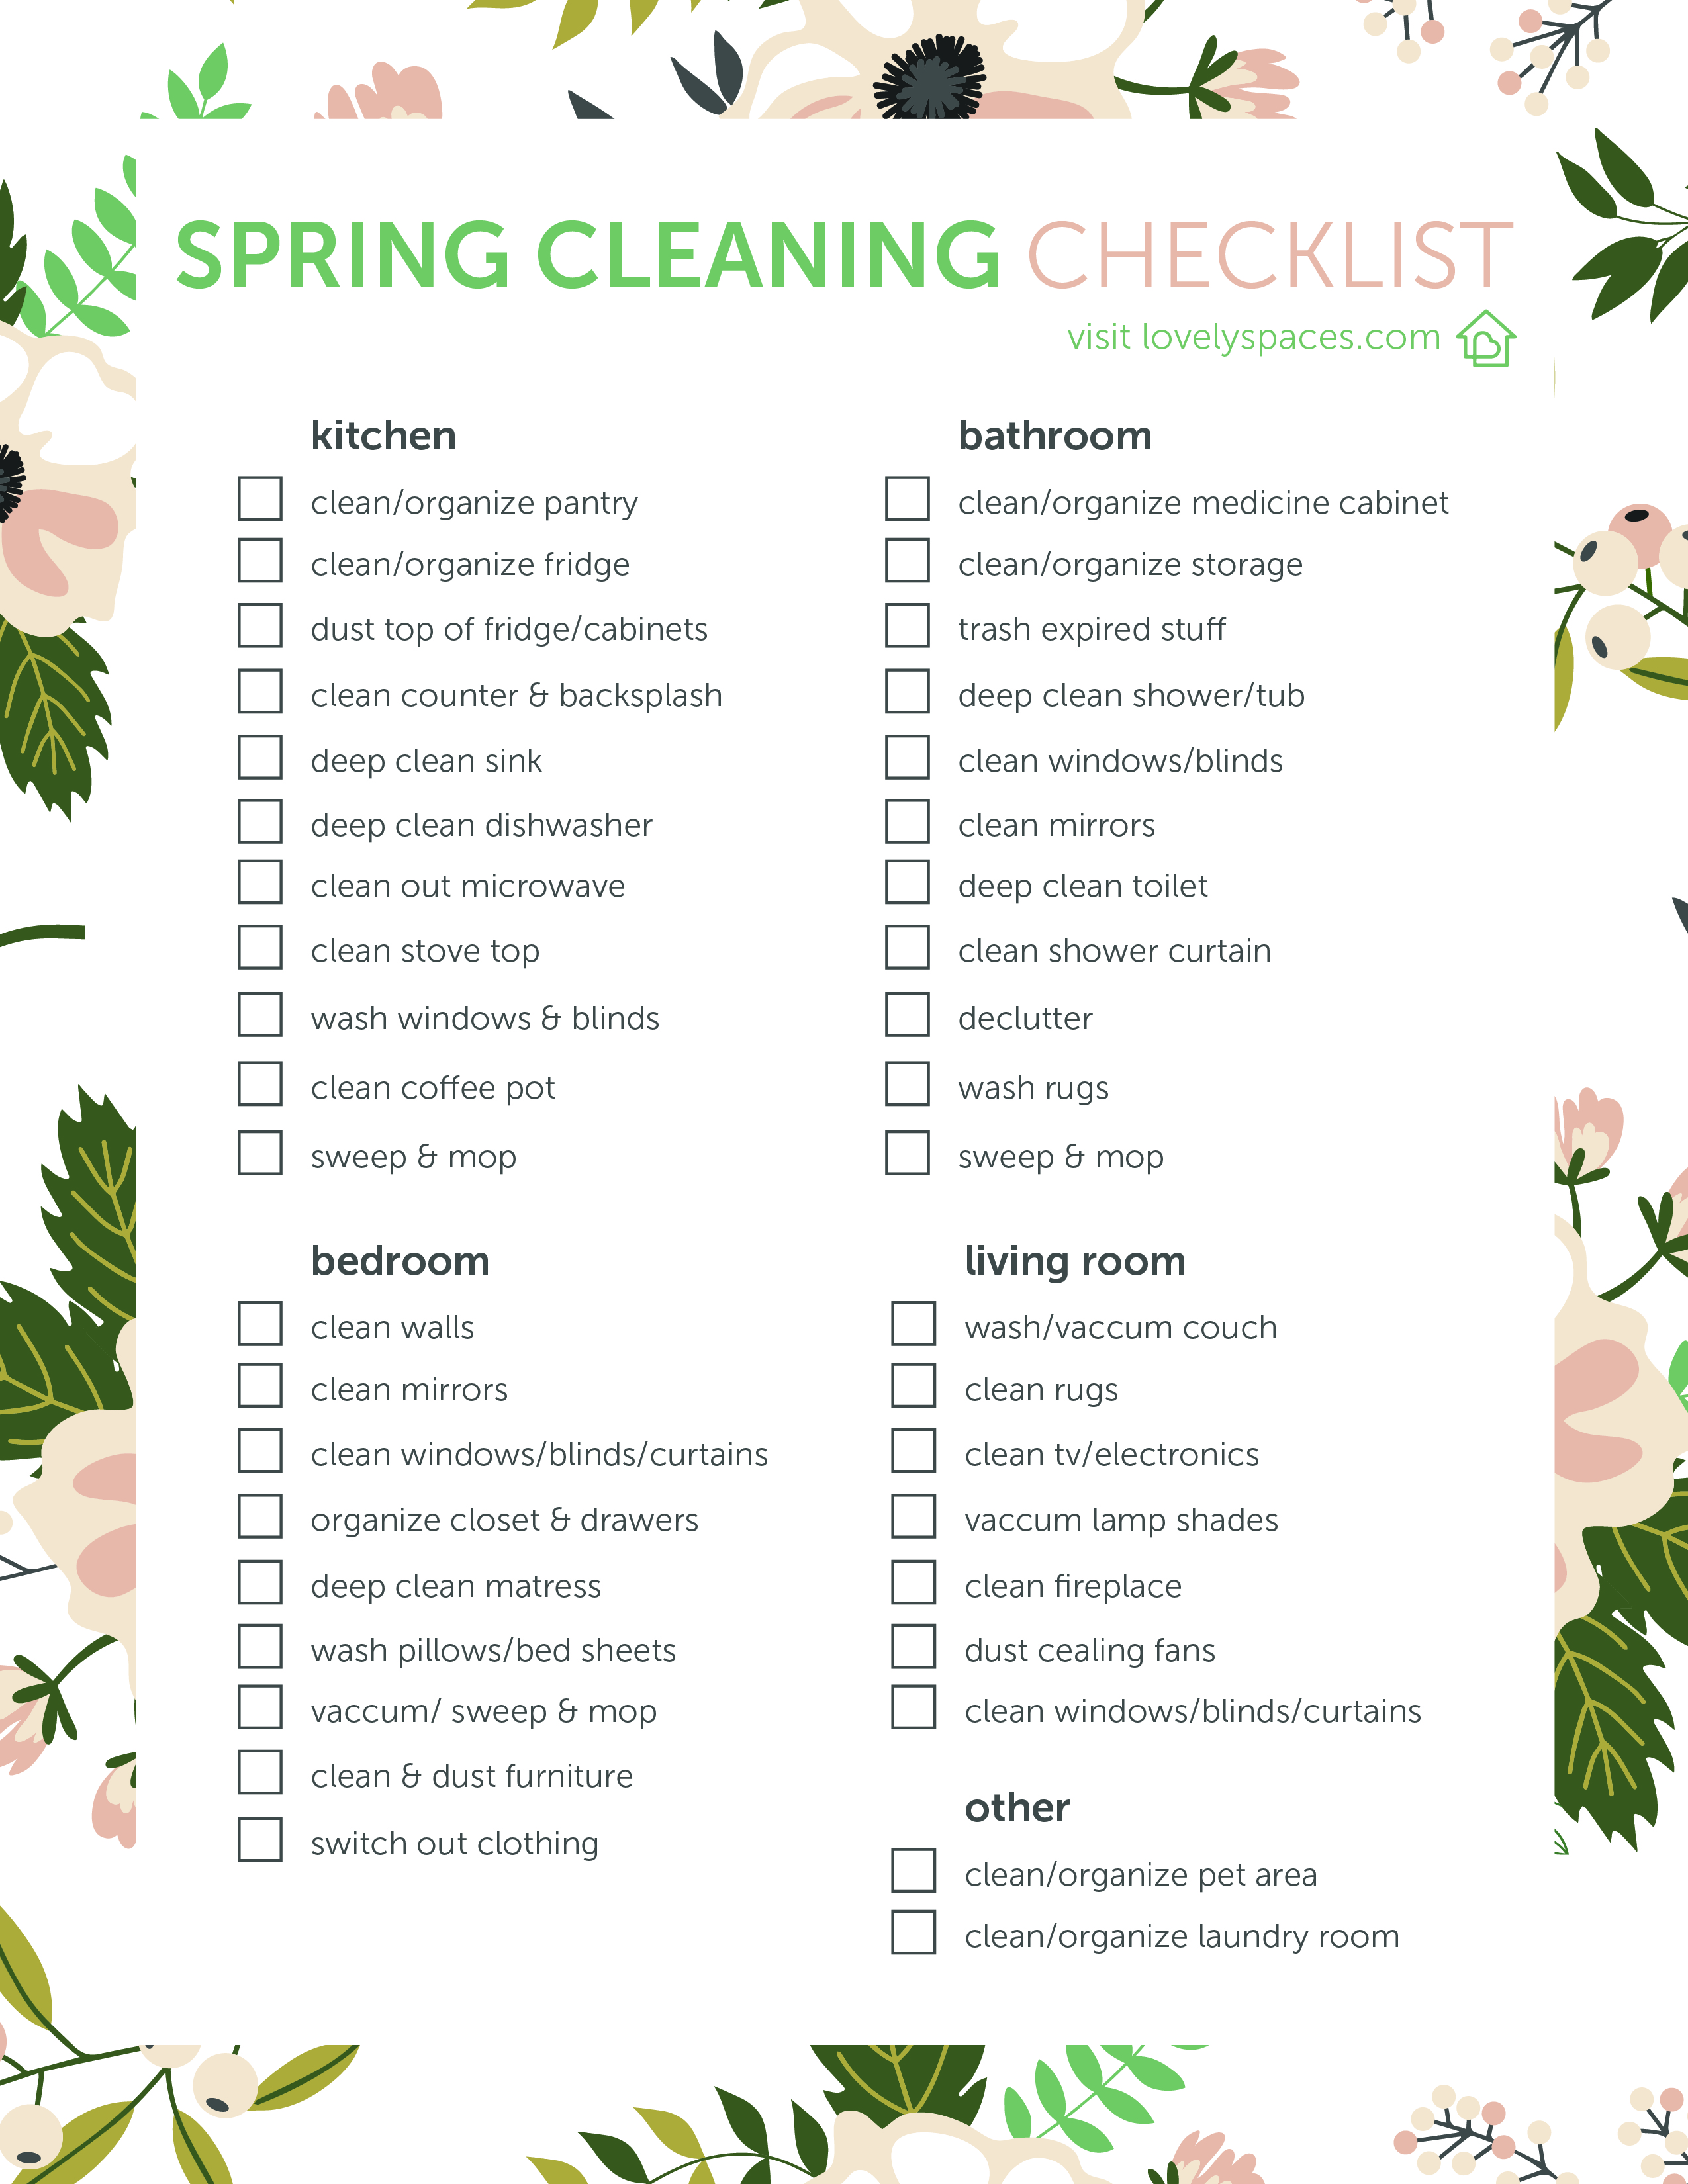 FREE DOWNLOAD Spring Cleaning Checklist Lovely Spaces